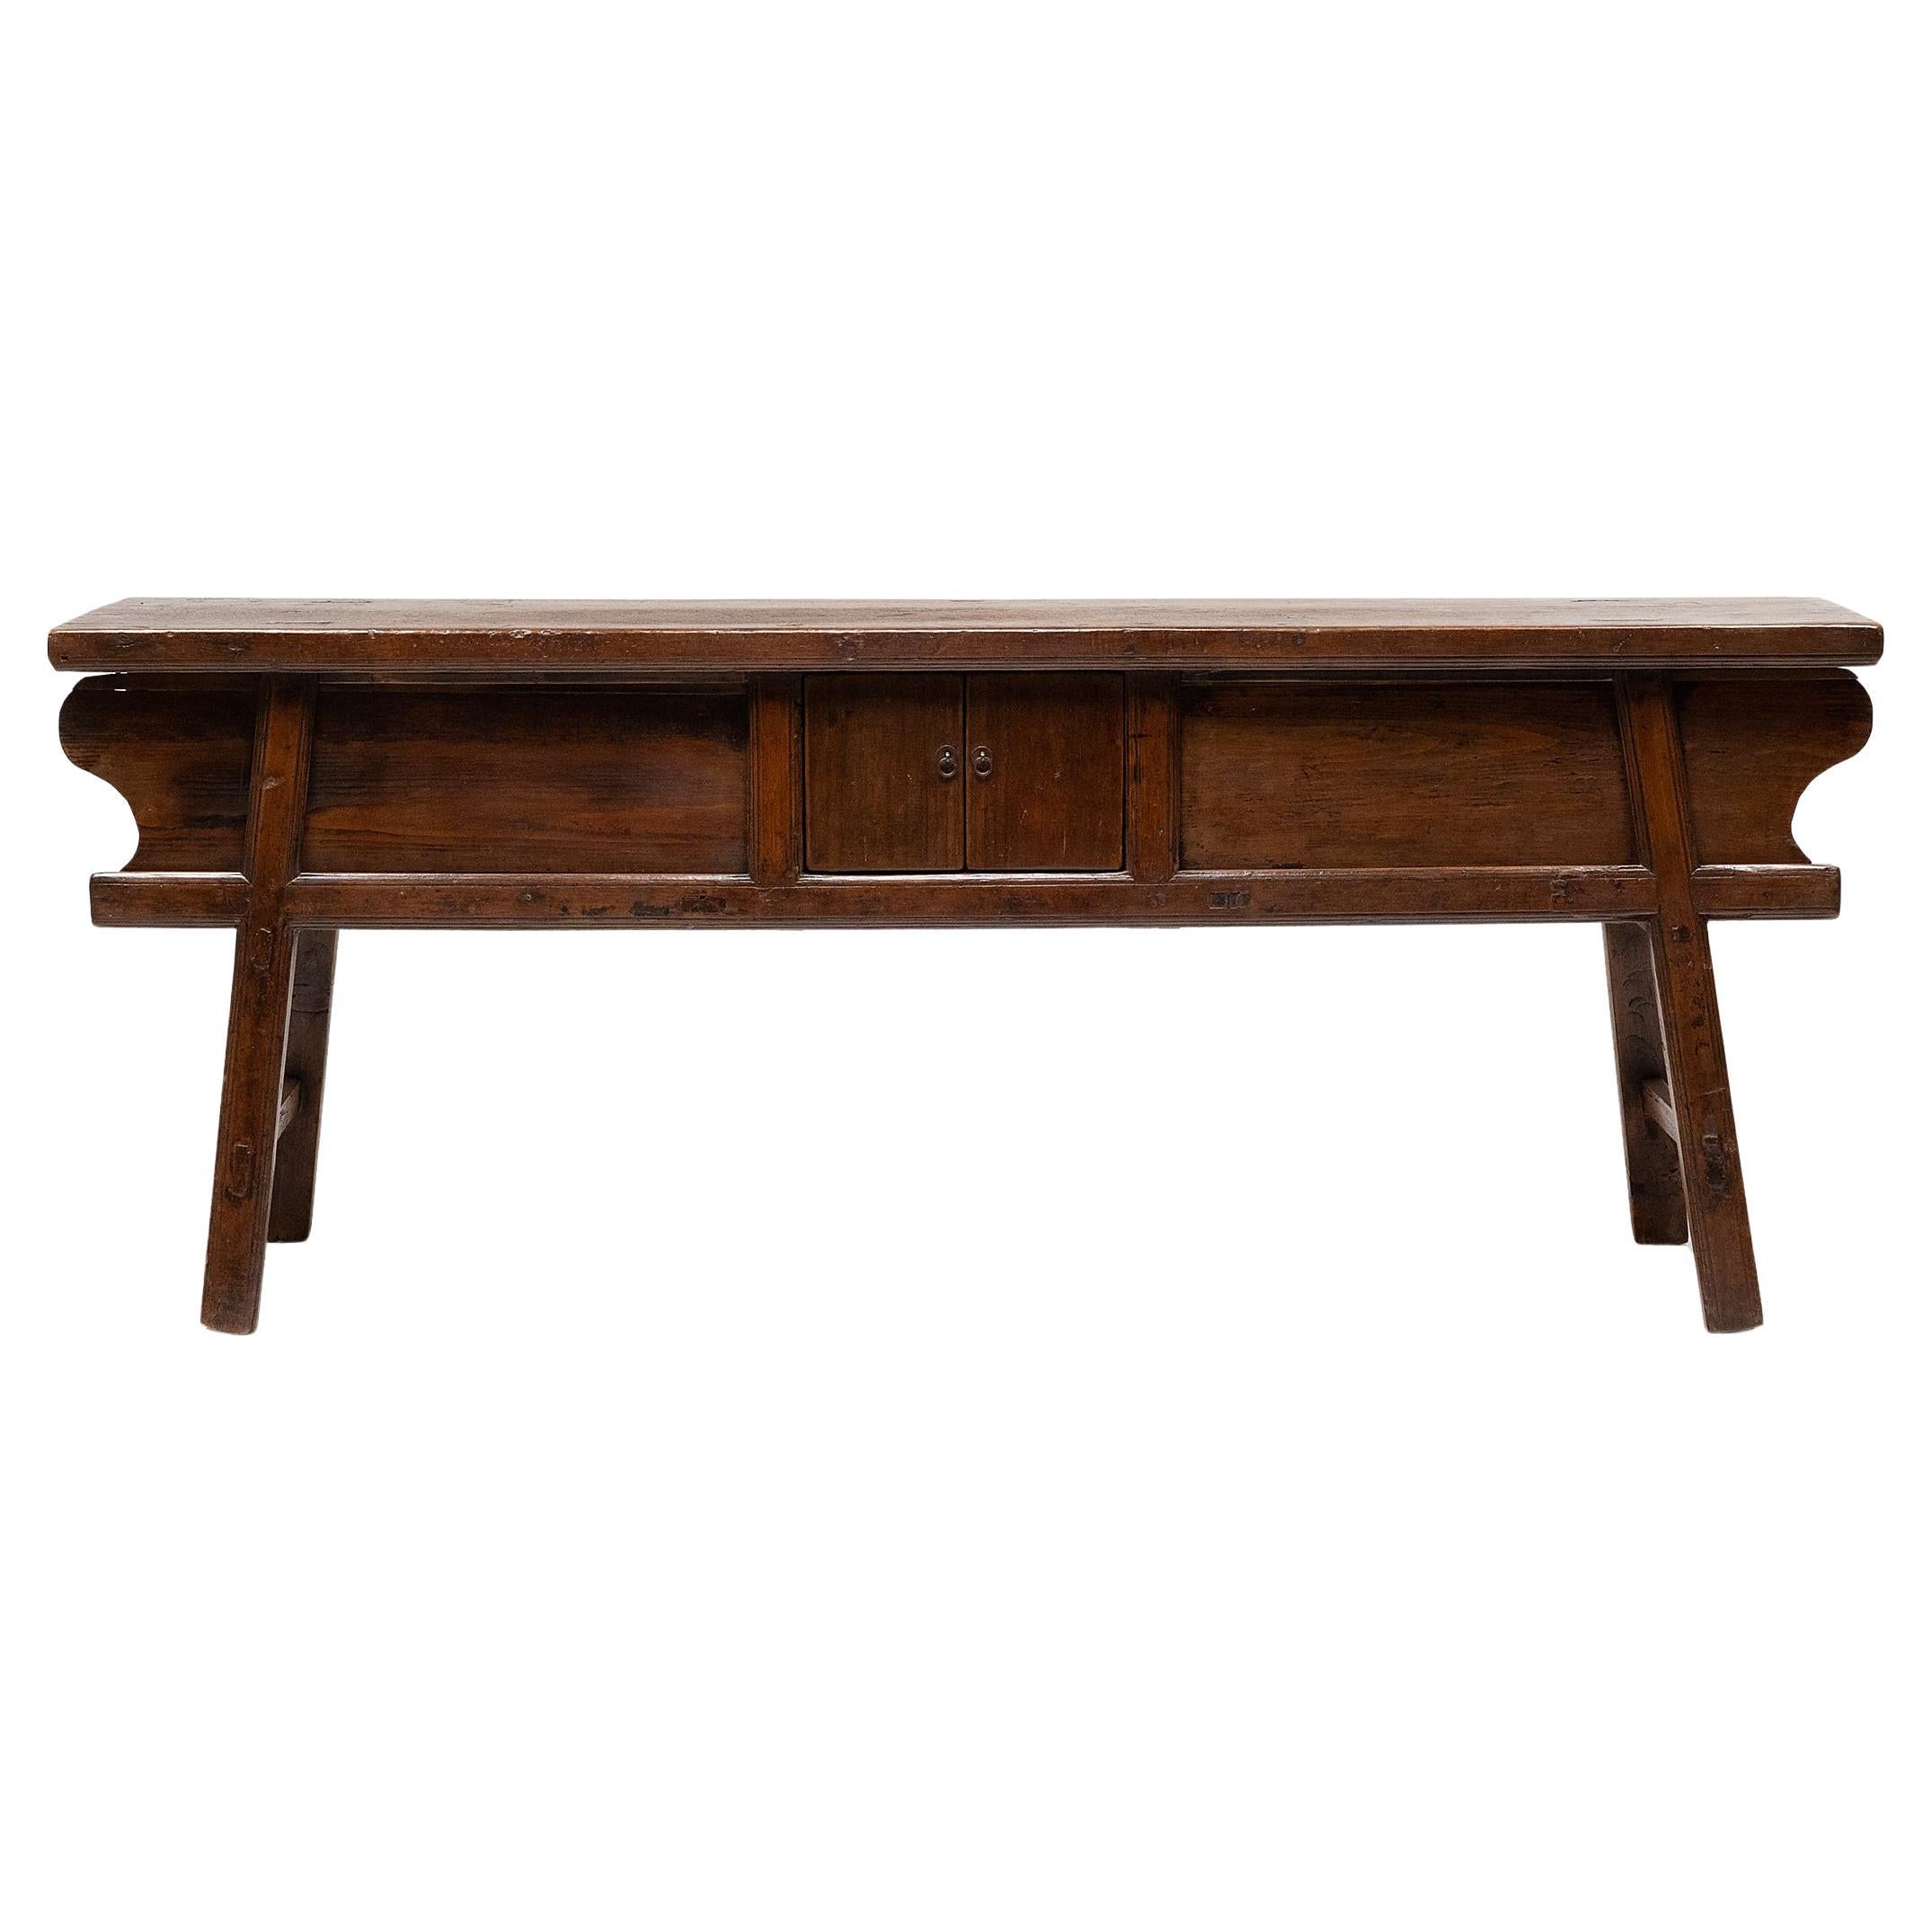 The warm tones and active grain of natural pine wood are the focus of this unusually articulated Dongbei coffer table. Made for a provincial home in northeastern China, this table was once used to honor loved ones past and present with photos or